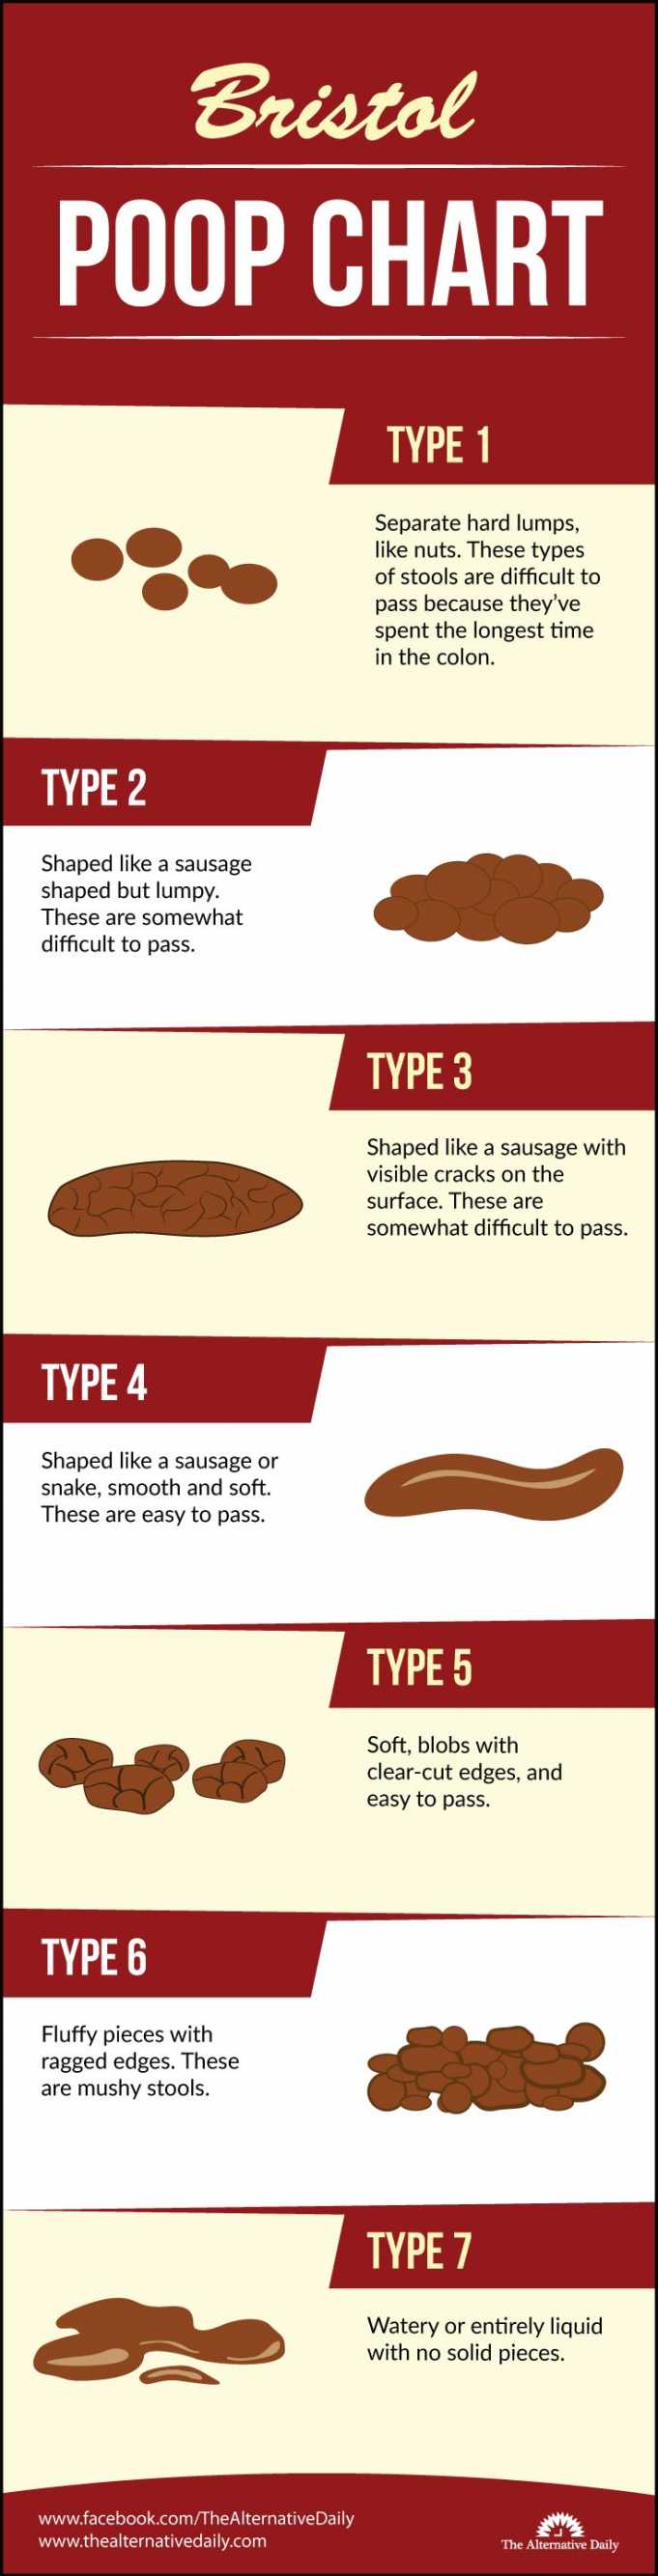 bristol-poop-chart-which-of-these-7-types-of-poop-do-you-have